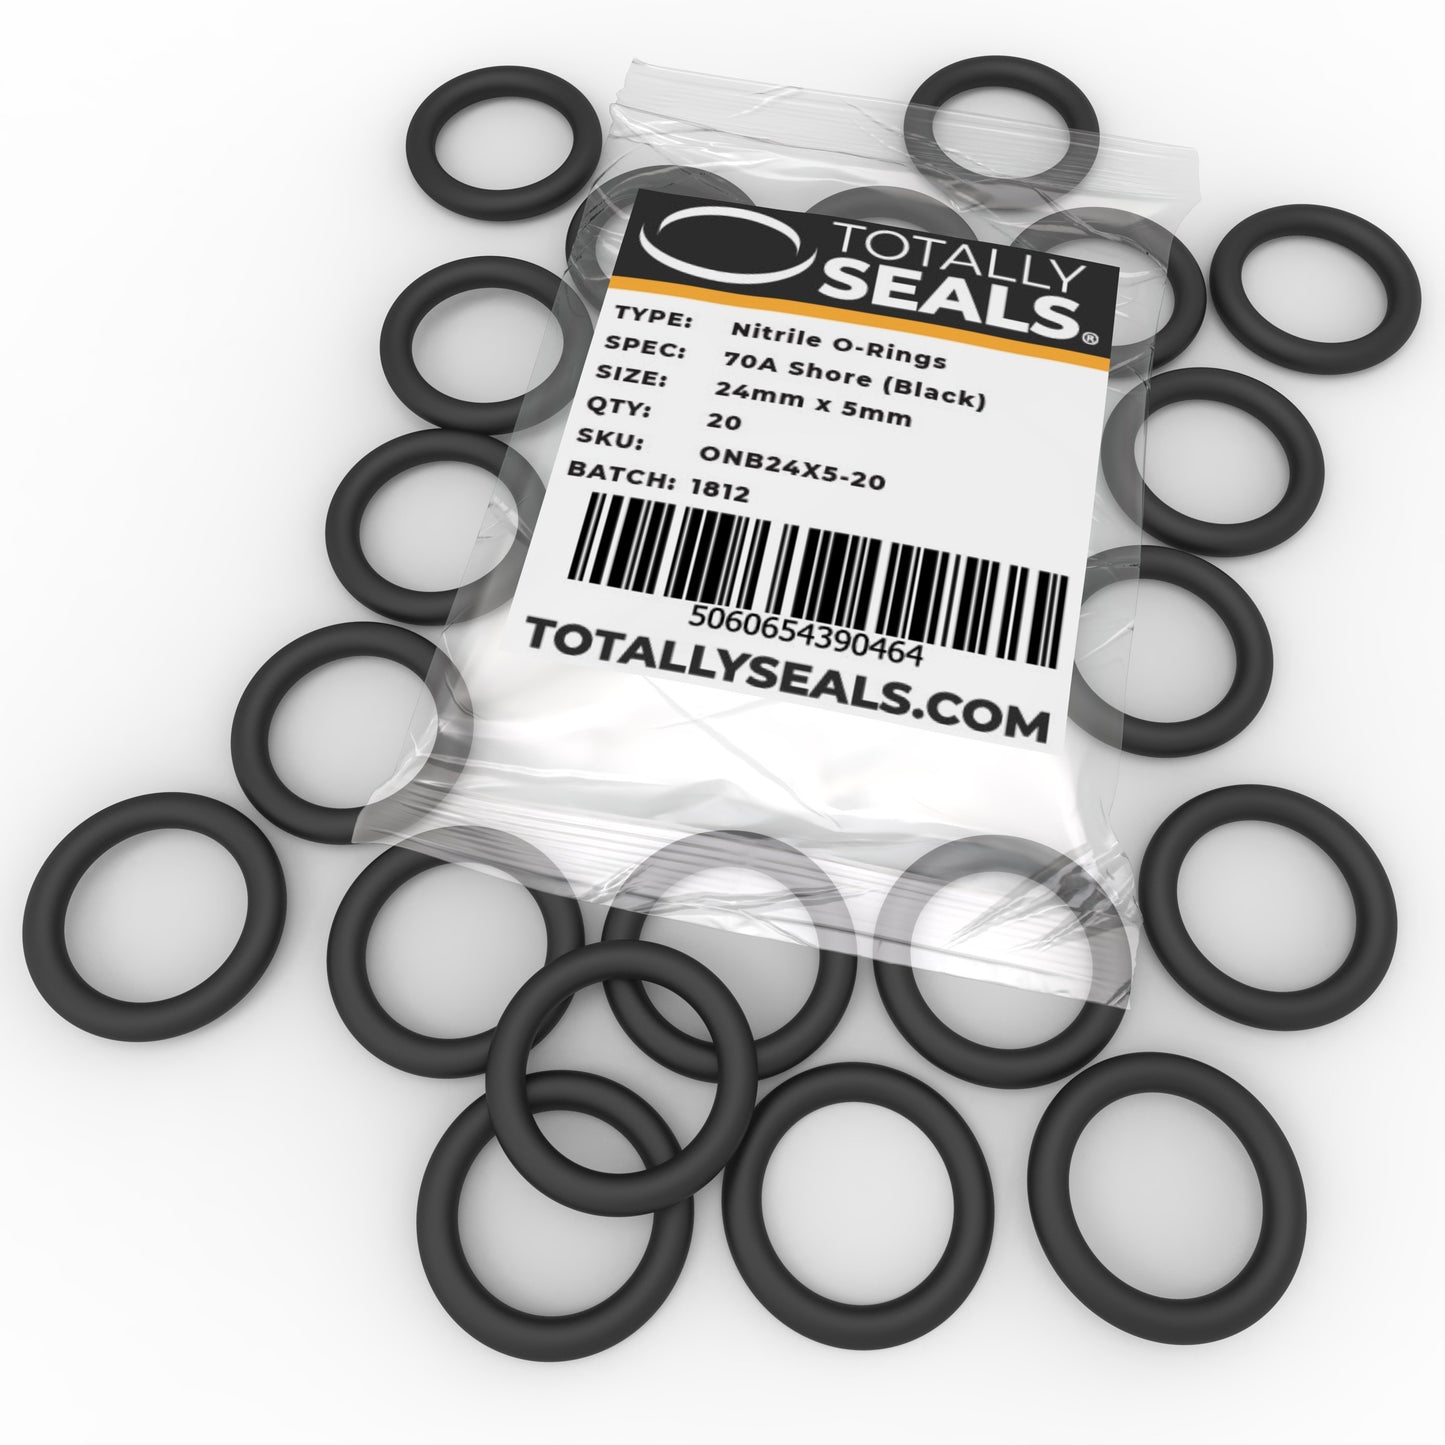 24mm x 5mm (34mm OD) Nitrile O-Rings - Totally Seals®